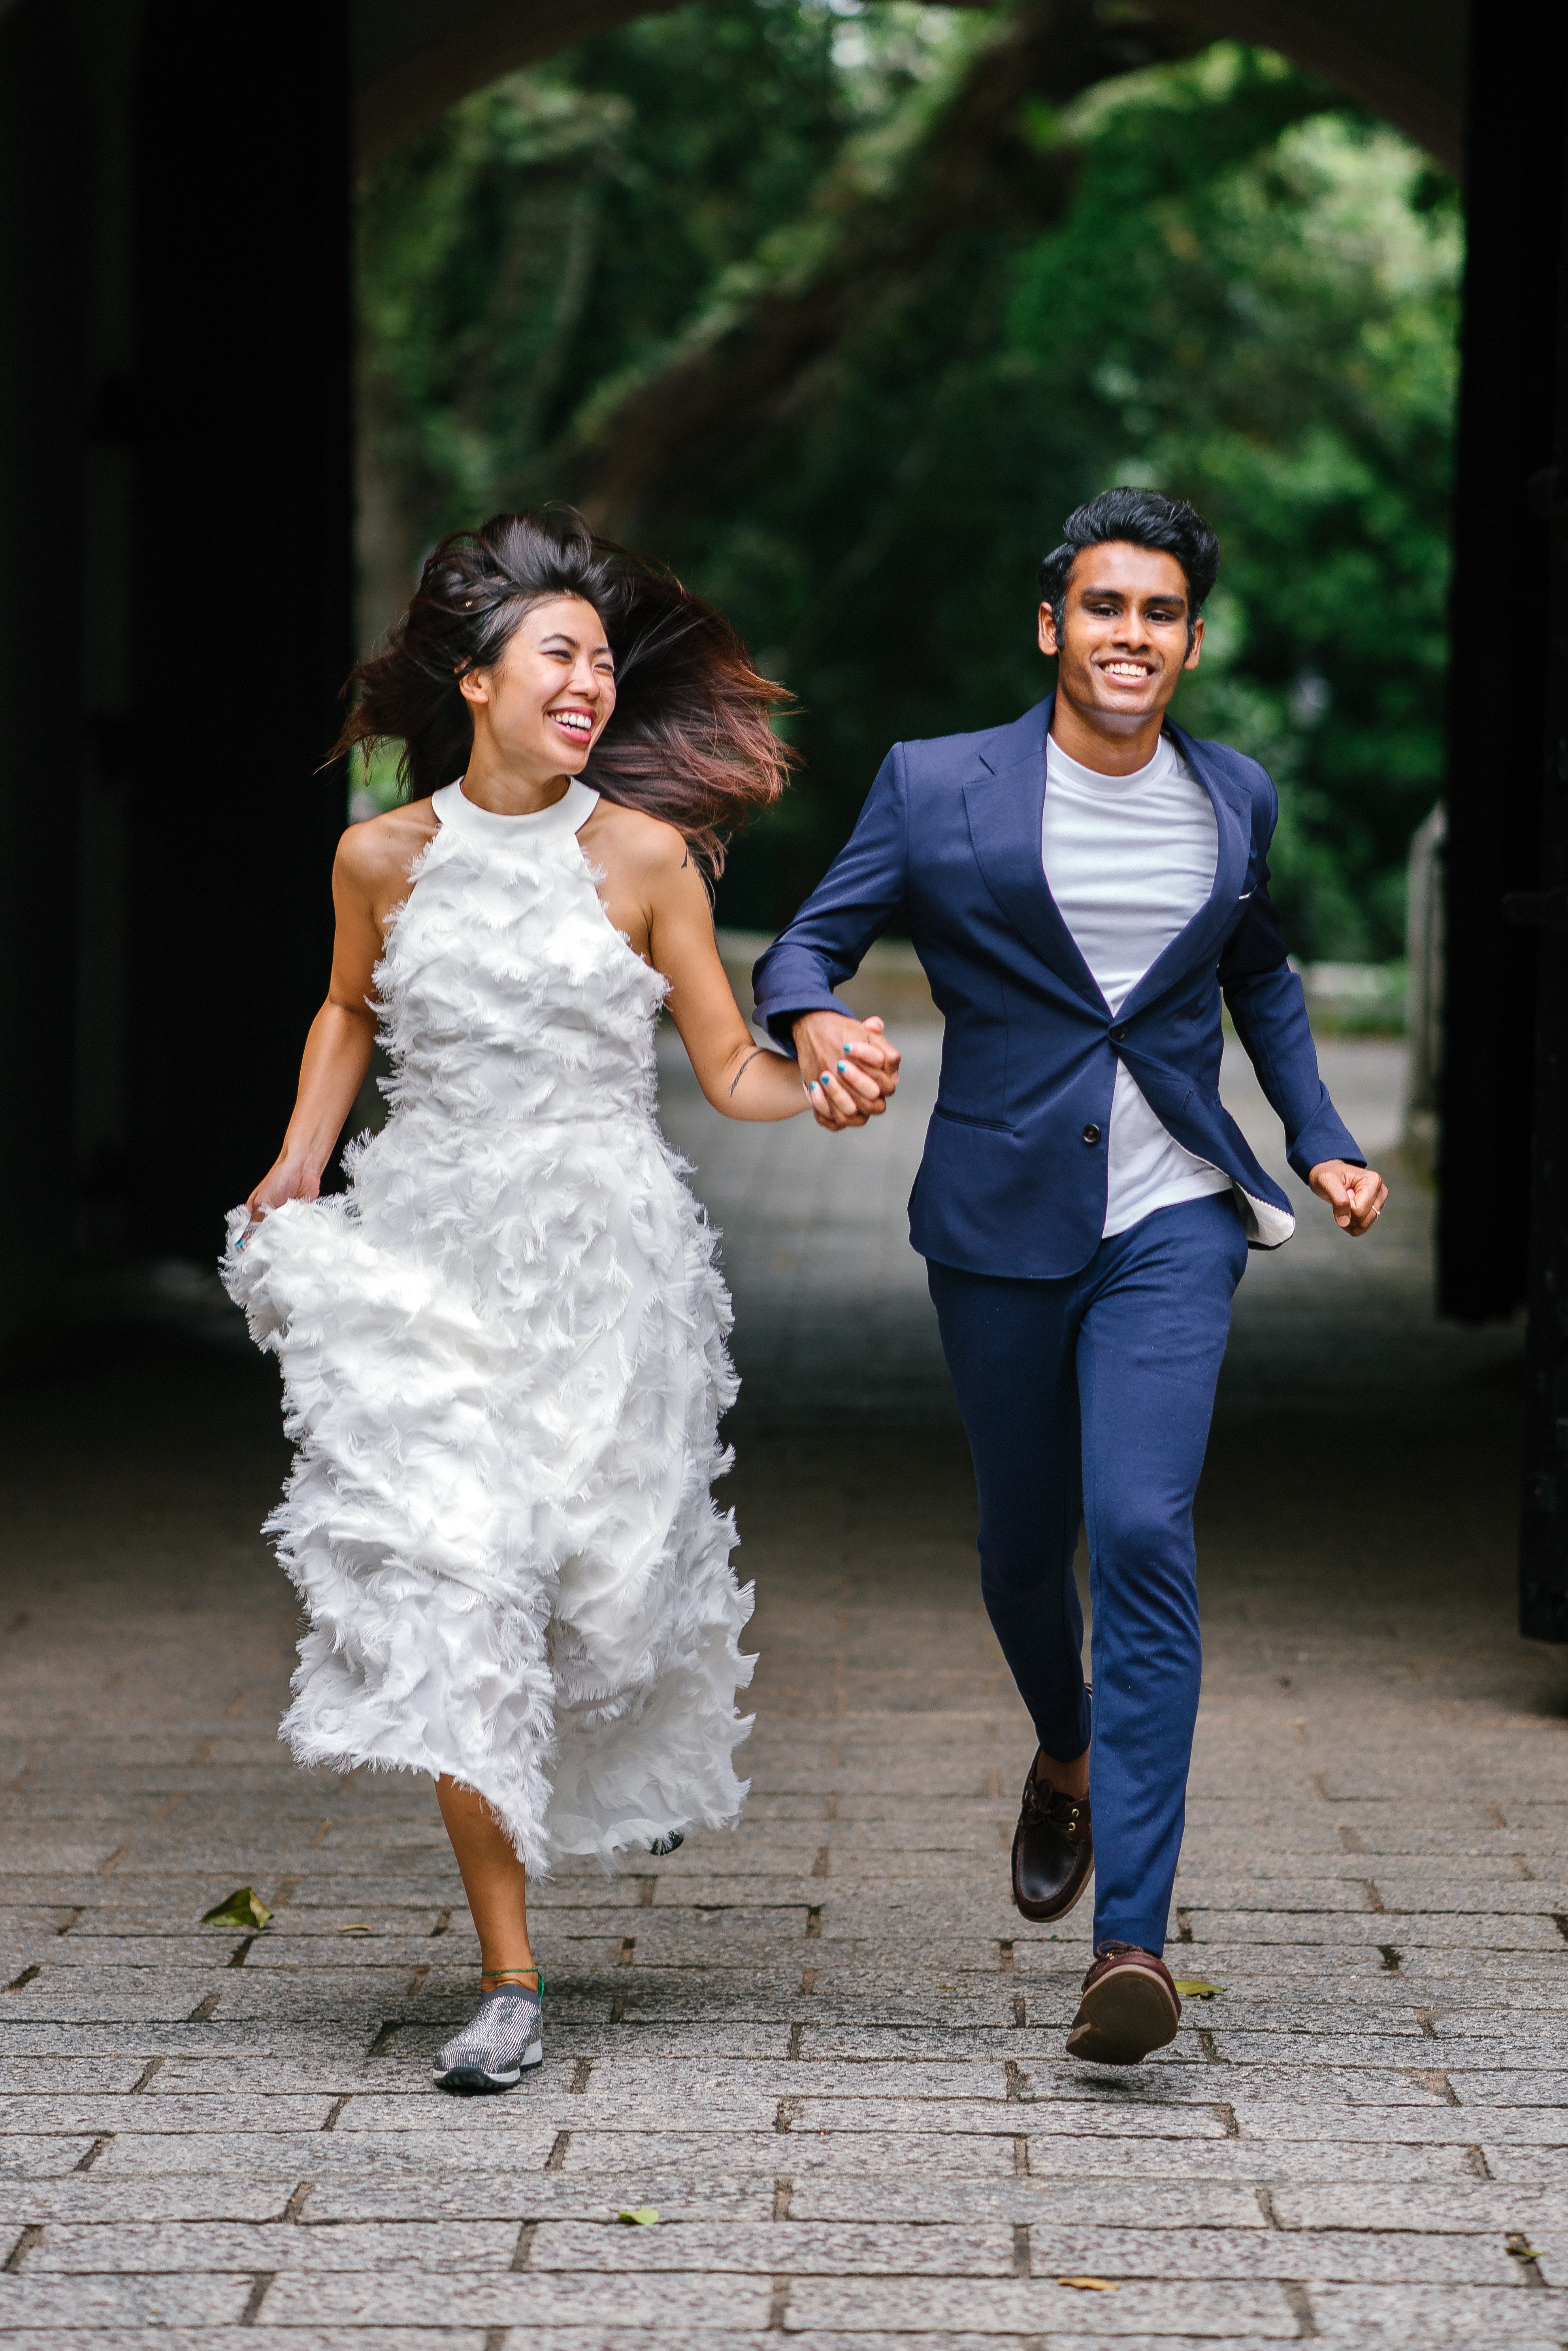 Bride and Groom Running on Concrete Pathway, Asian, Smiling, Park, People, HQ Photo